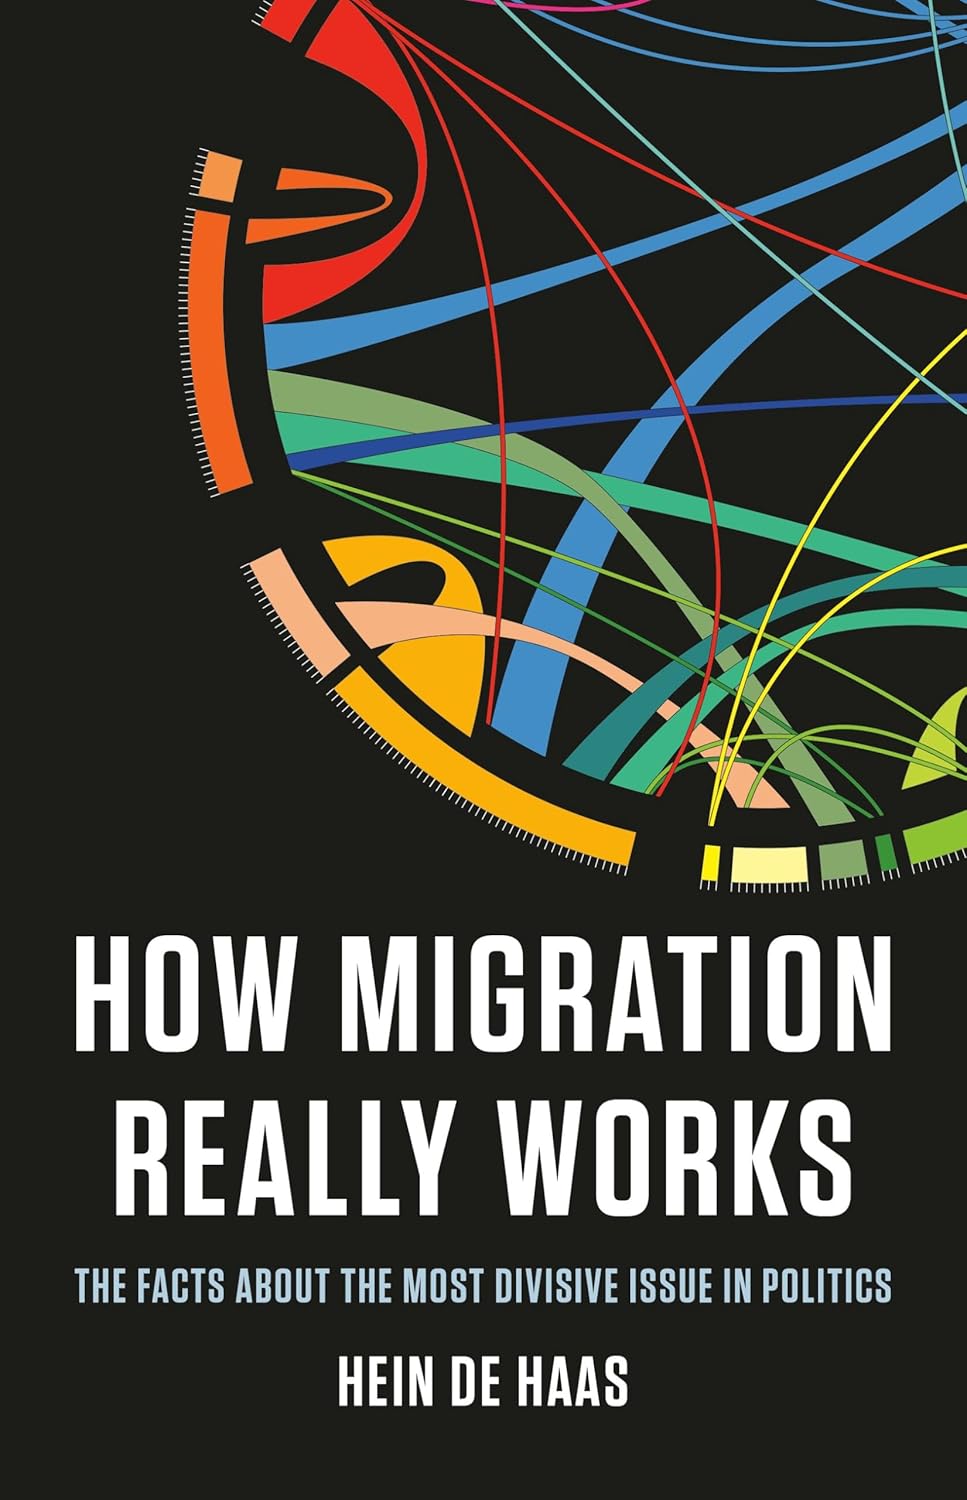 Hein de Haas: How Migration Really Works (2023, Basic Books)